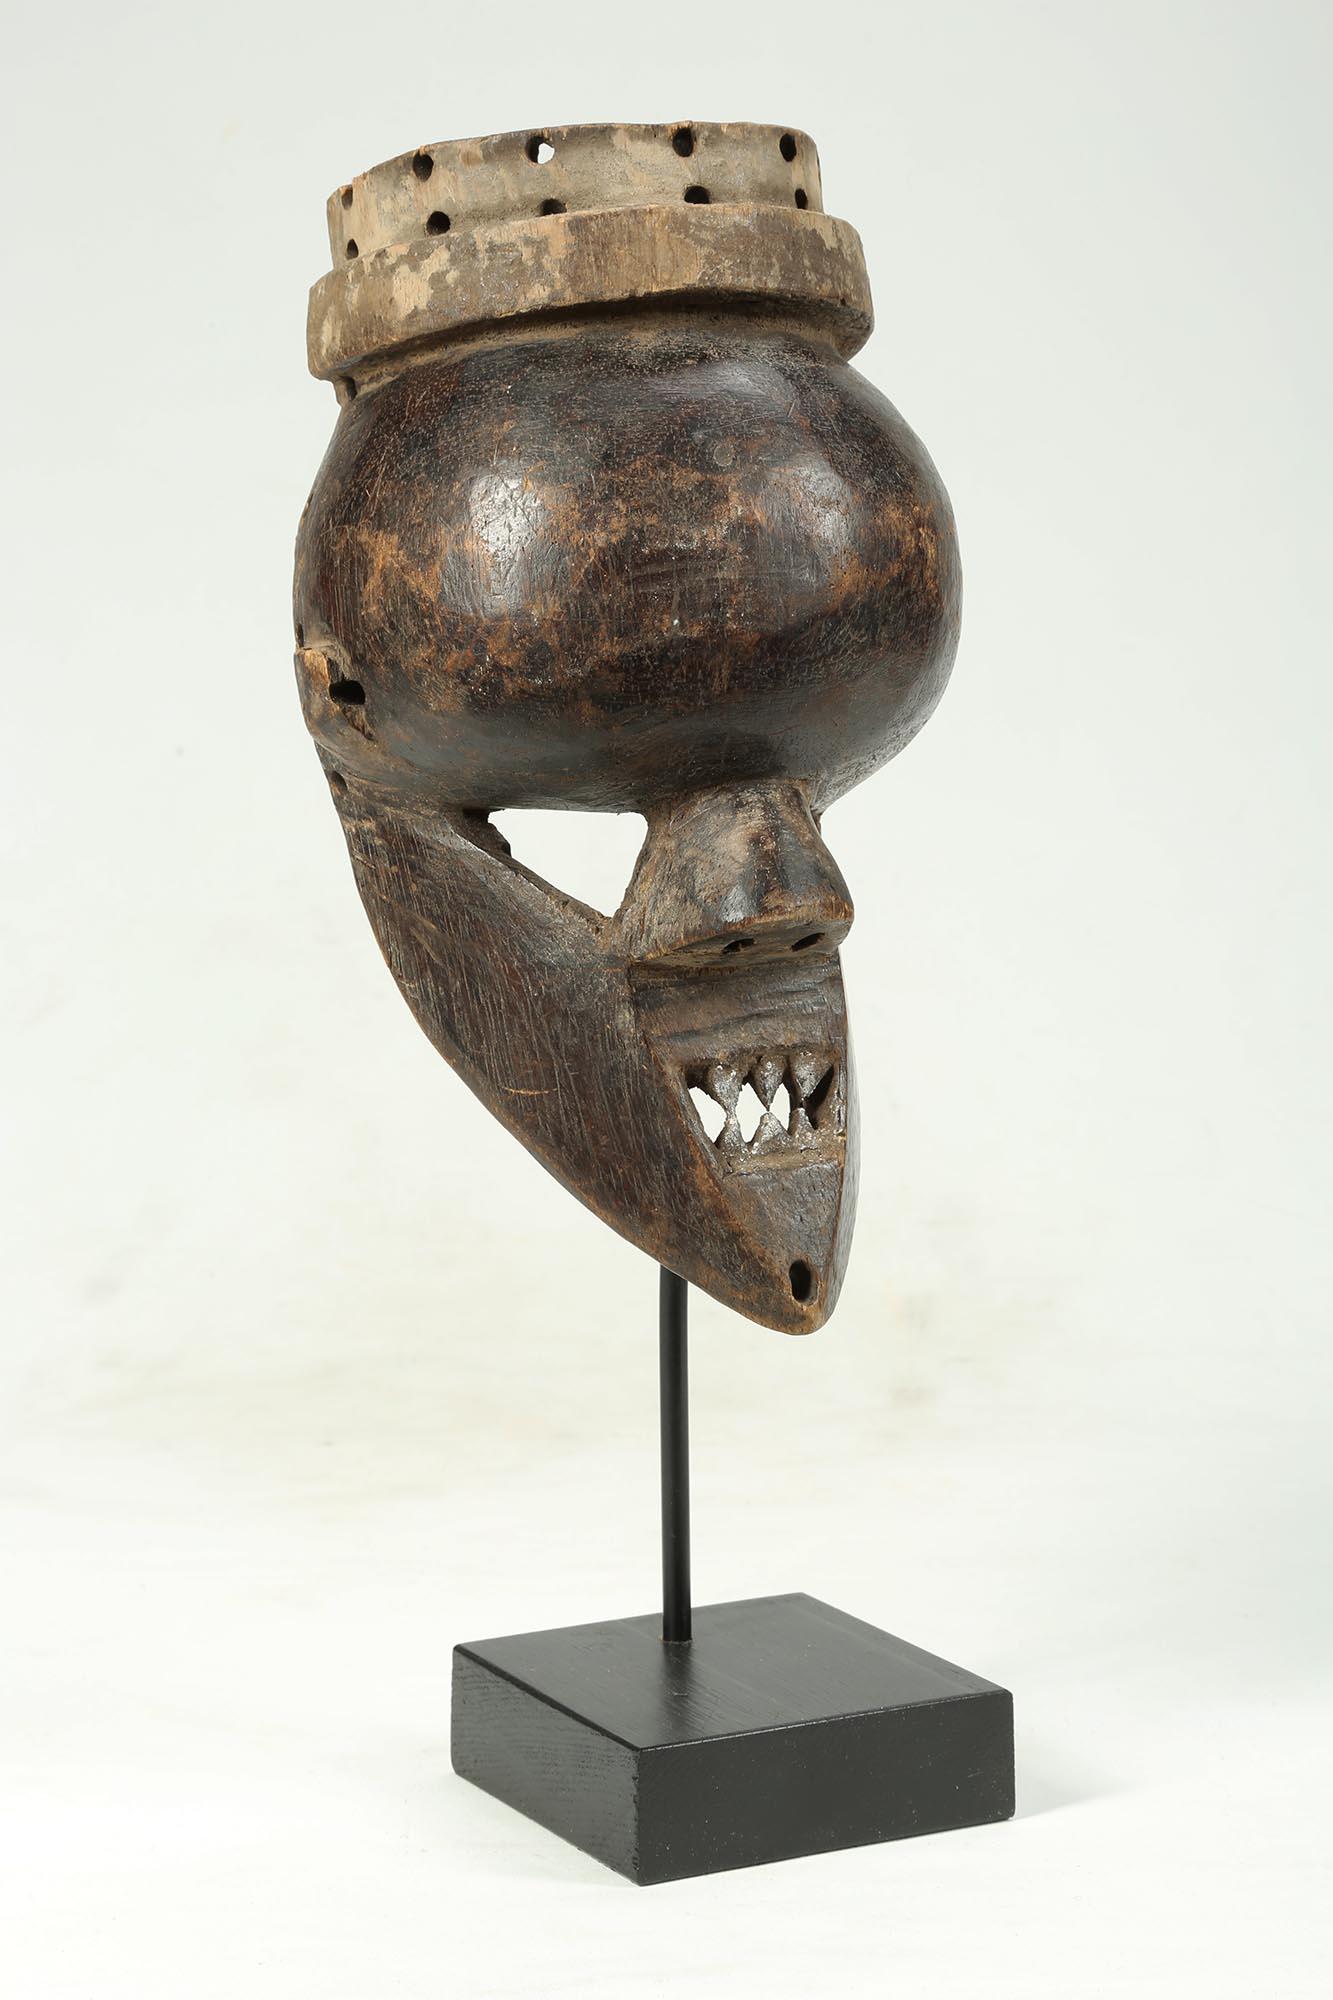 Early carved wood small Salampasu Warrior's Mask, Zaire, Africa early 20th century, remains of black and white pigments, on custom stand. Mask 10